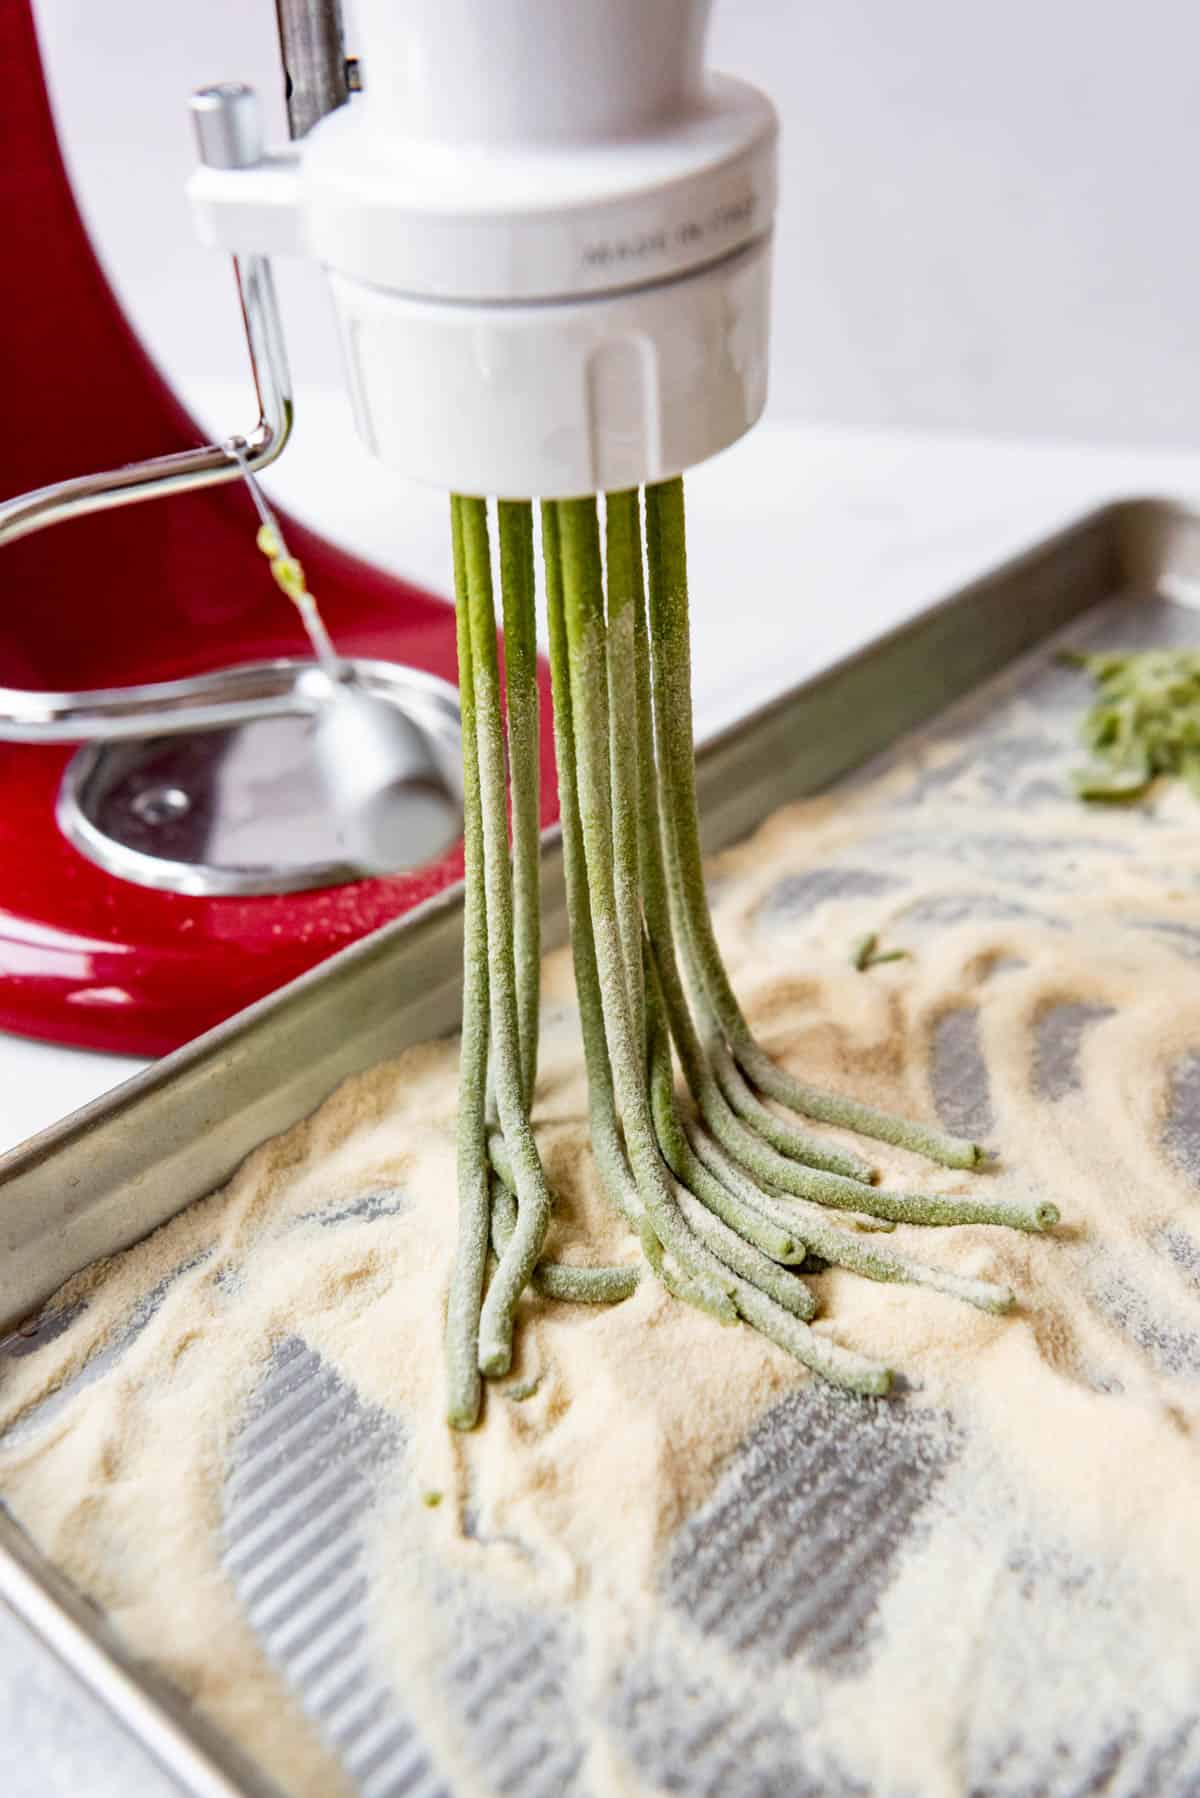 Spinach pasta being extruded into a bucatini shape.